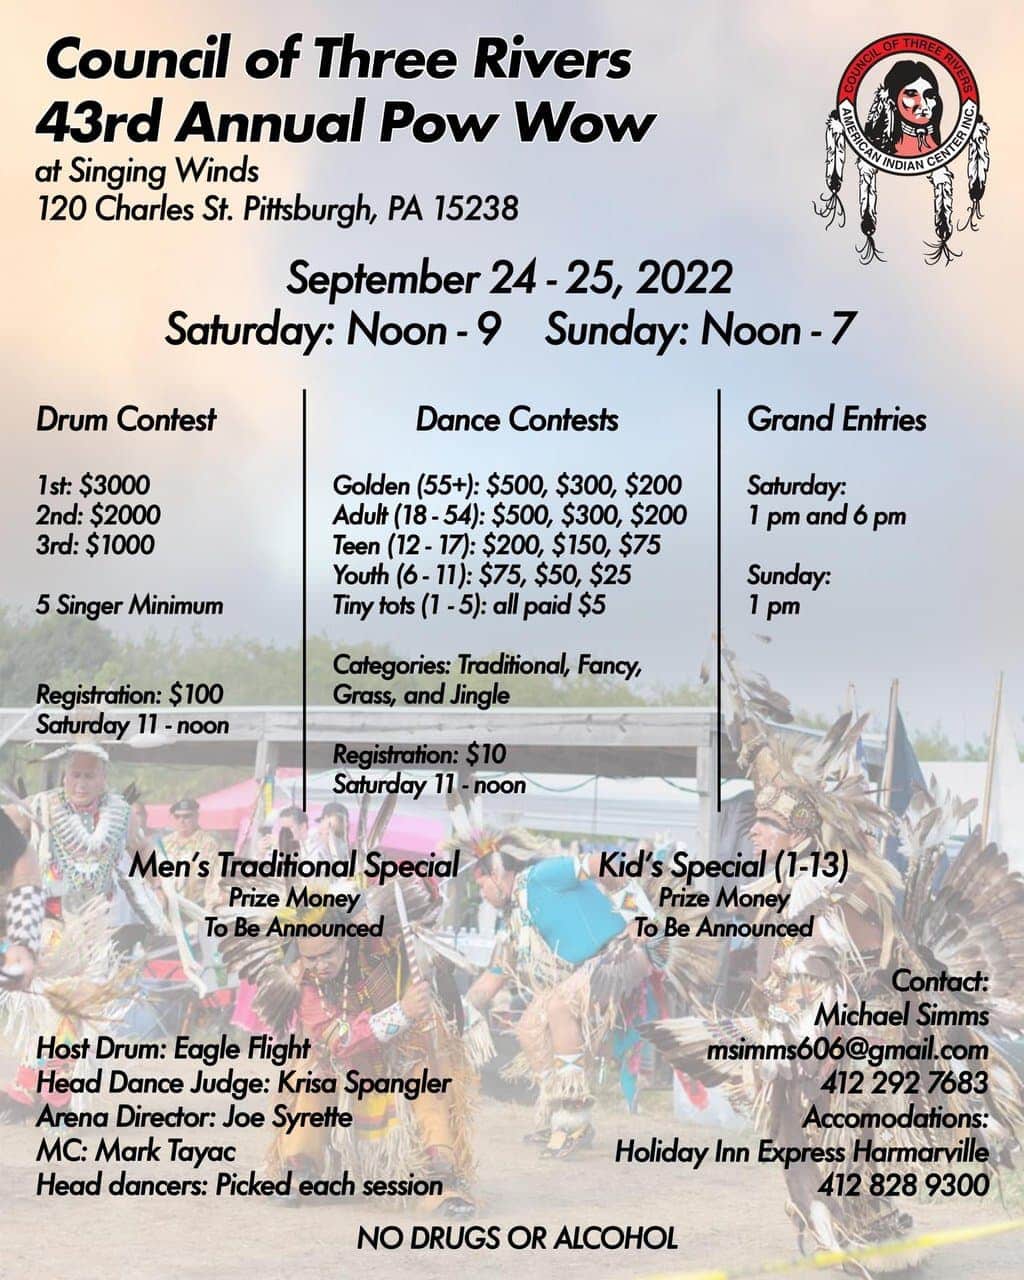 Council of Three Rivers American Indian Center 43rd Annual Pow Wow 2022